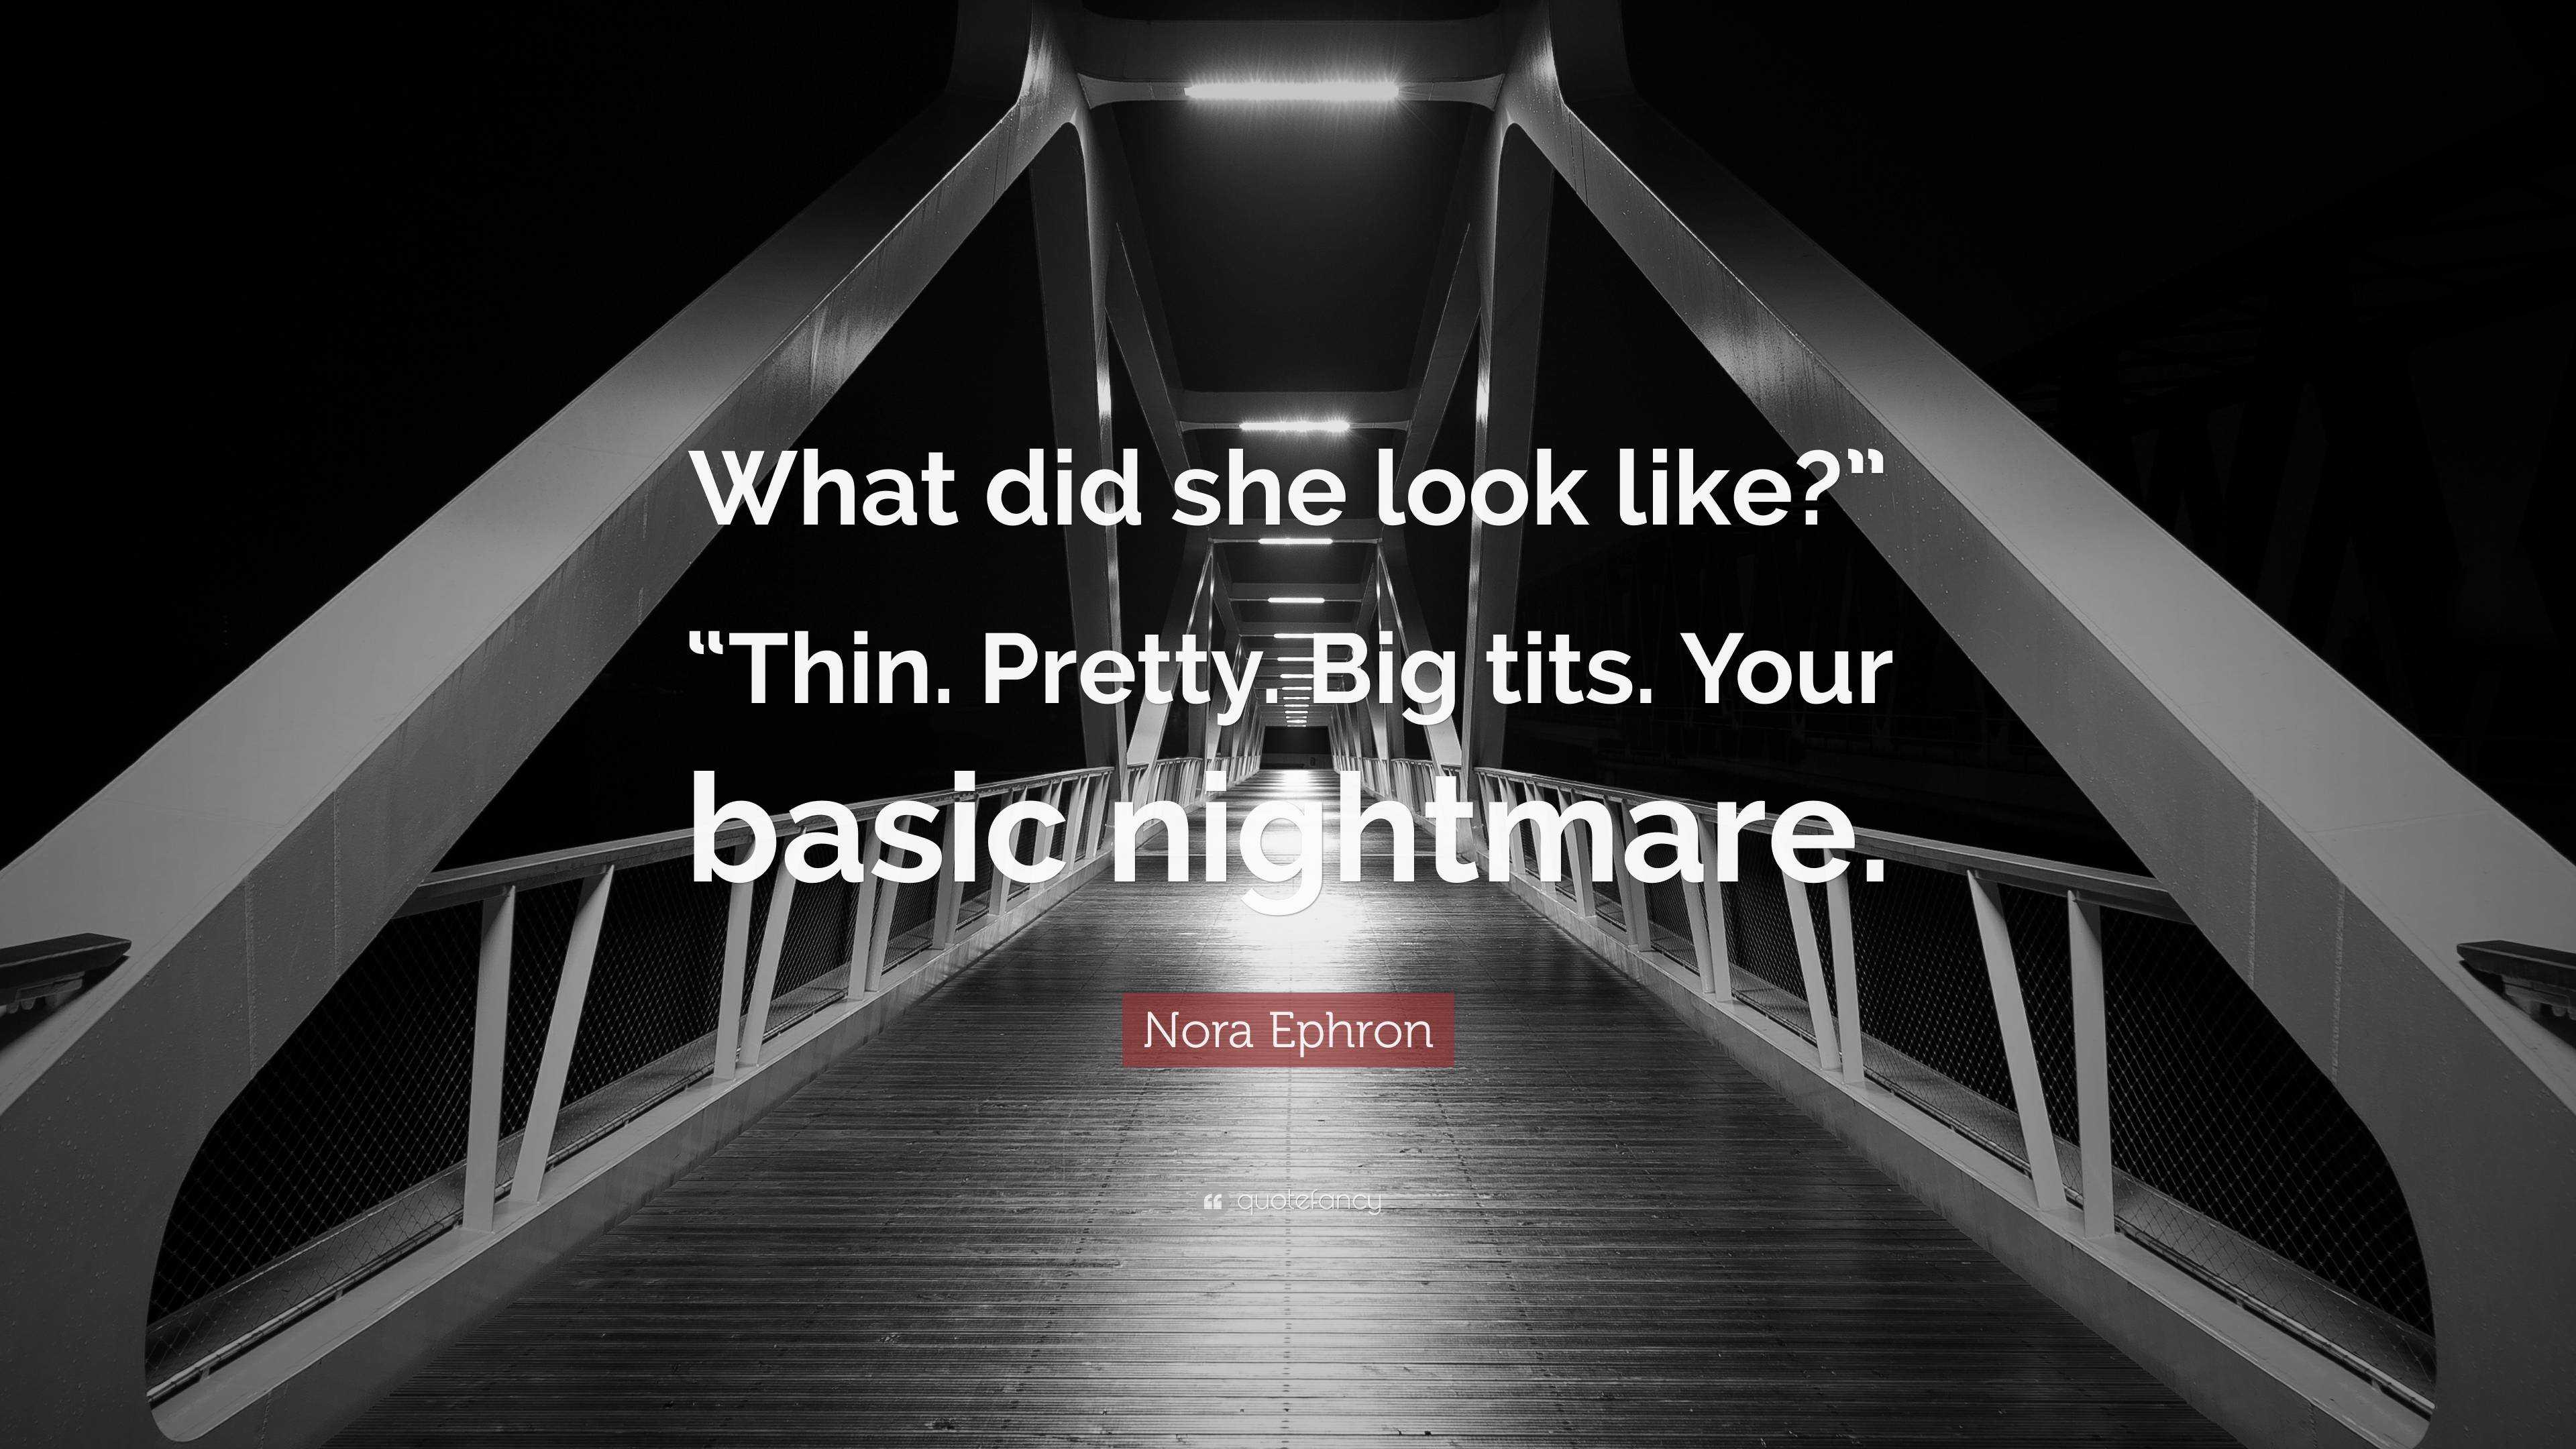 Nora Ephron Quote: “What did she look like?” “Thin. Pretty. Big